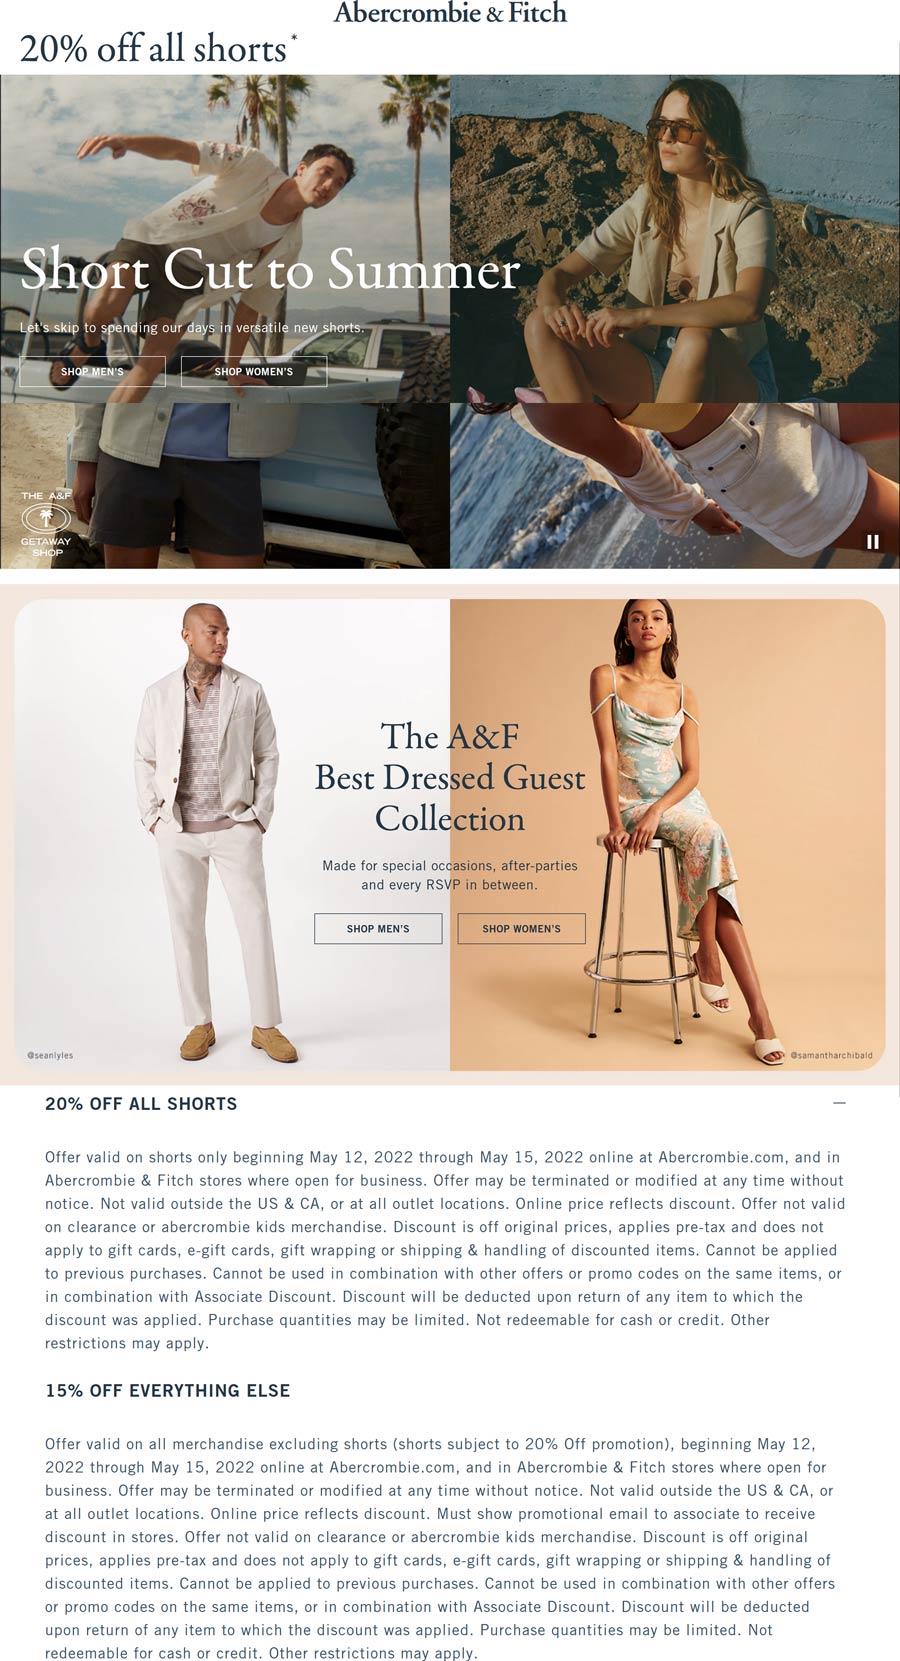 Abercrombie & Fitch stores Coupon  15% off everything & 20% off shorts at Abercrombie & Fitch, ditto online #abercrombiefitch 